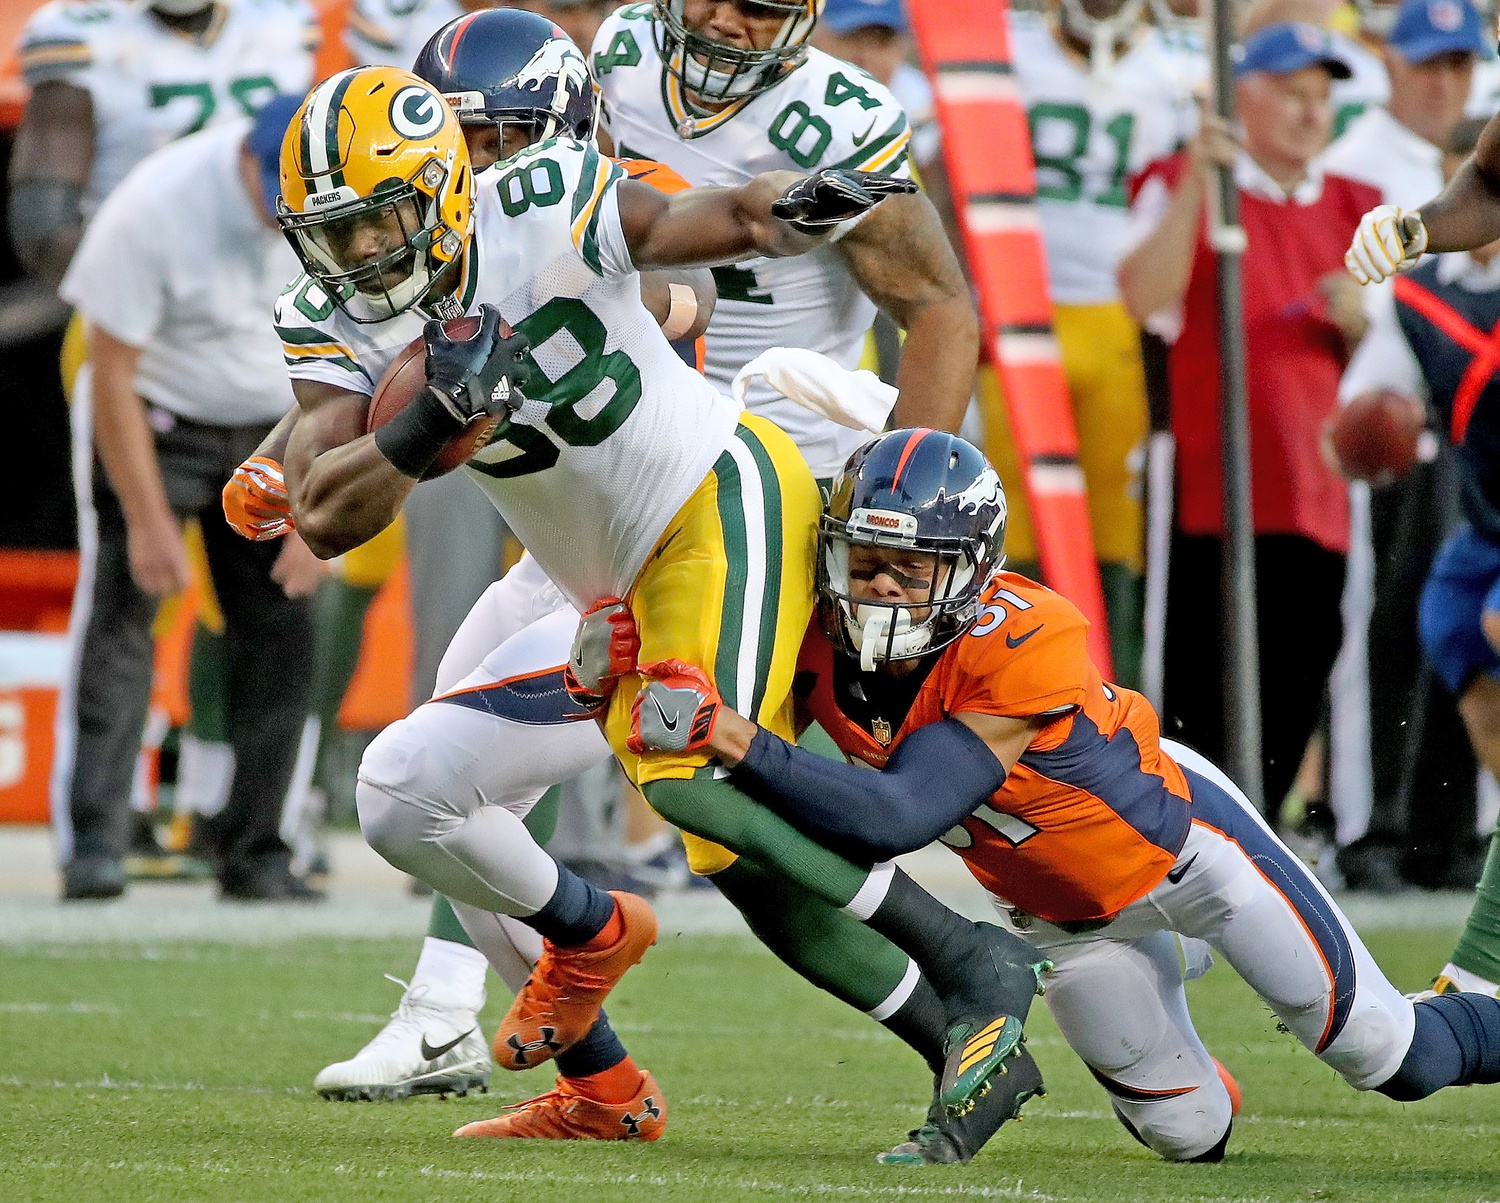 Packers vs Broncos: Important Takeaways for Green Bay